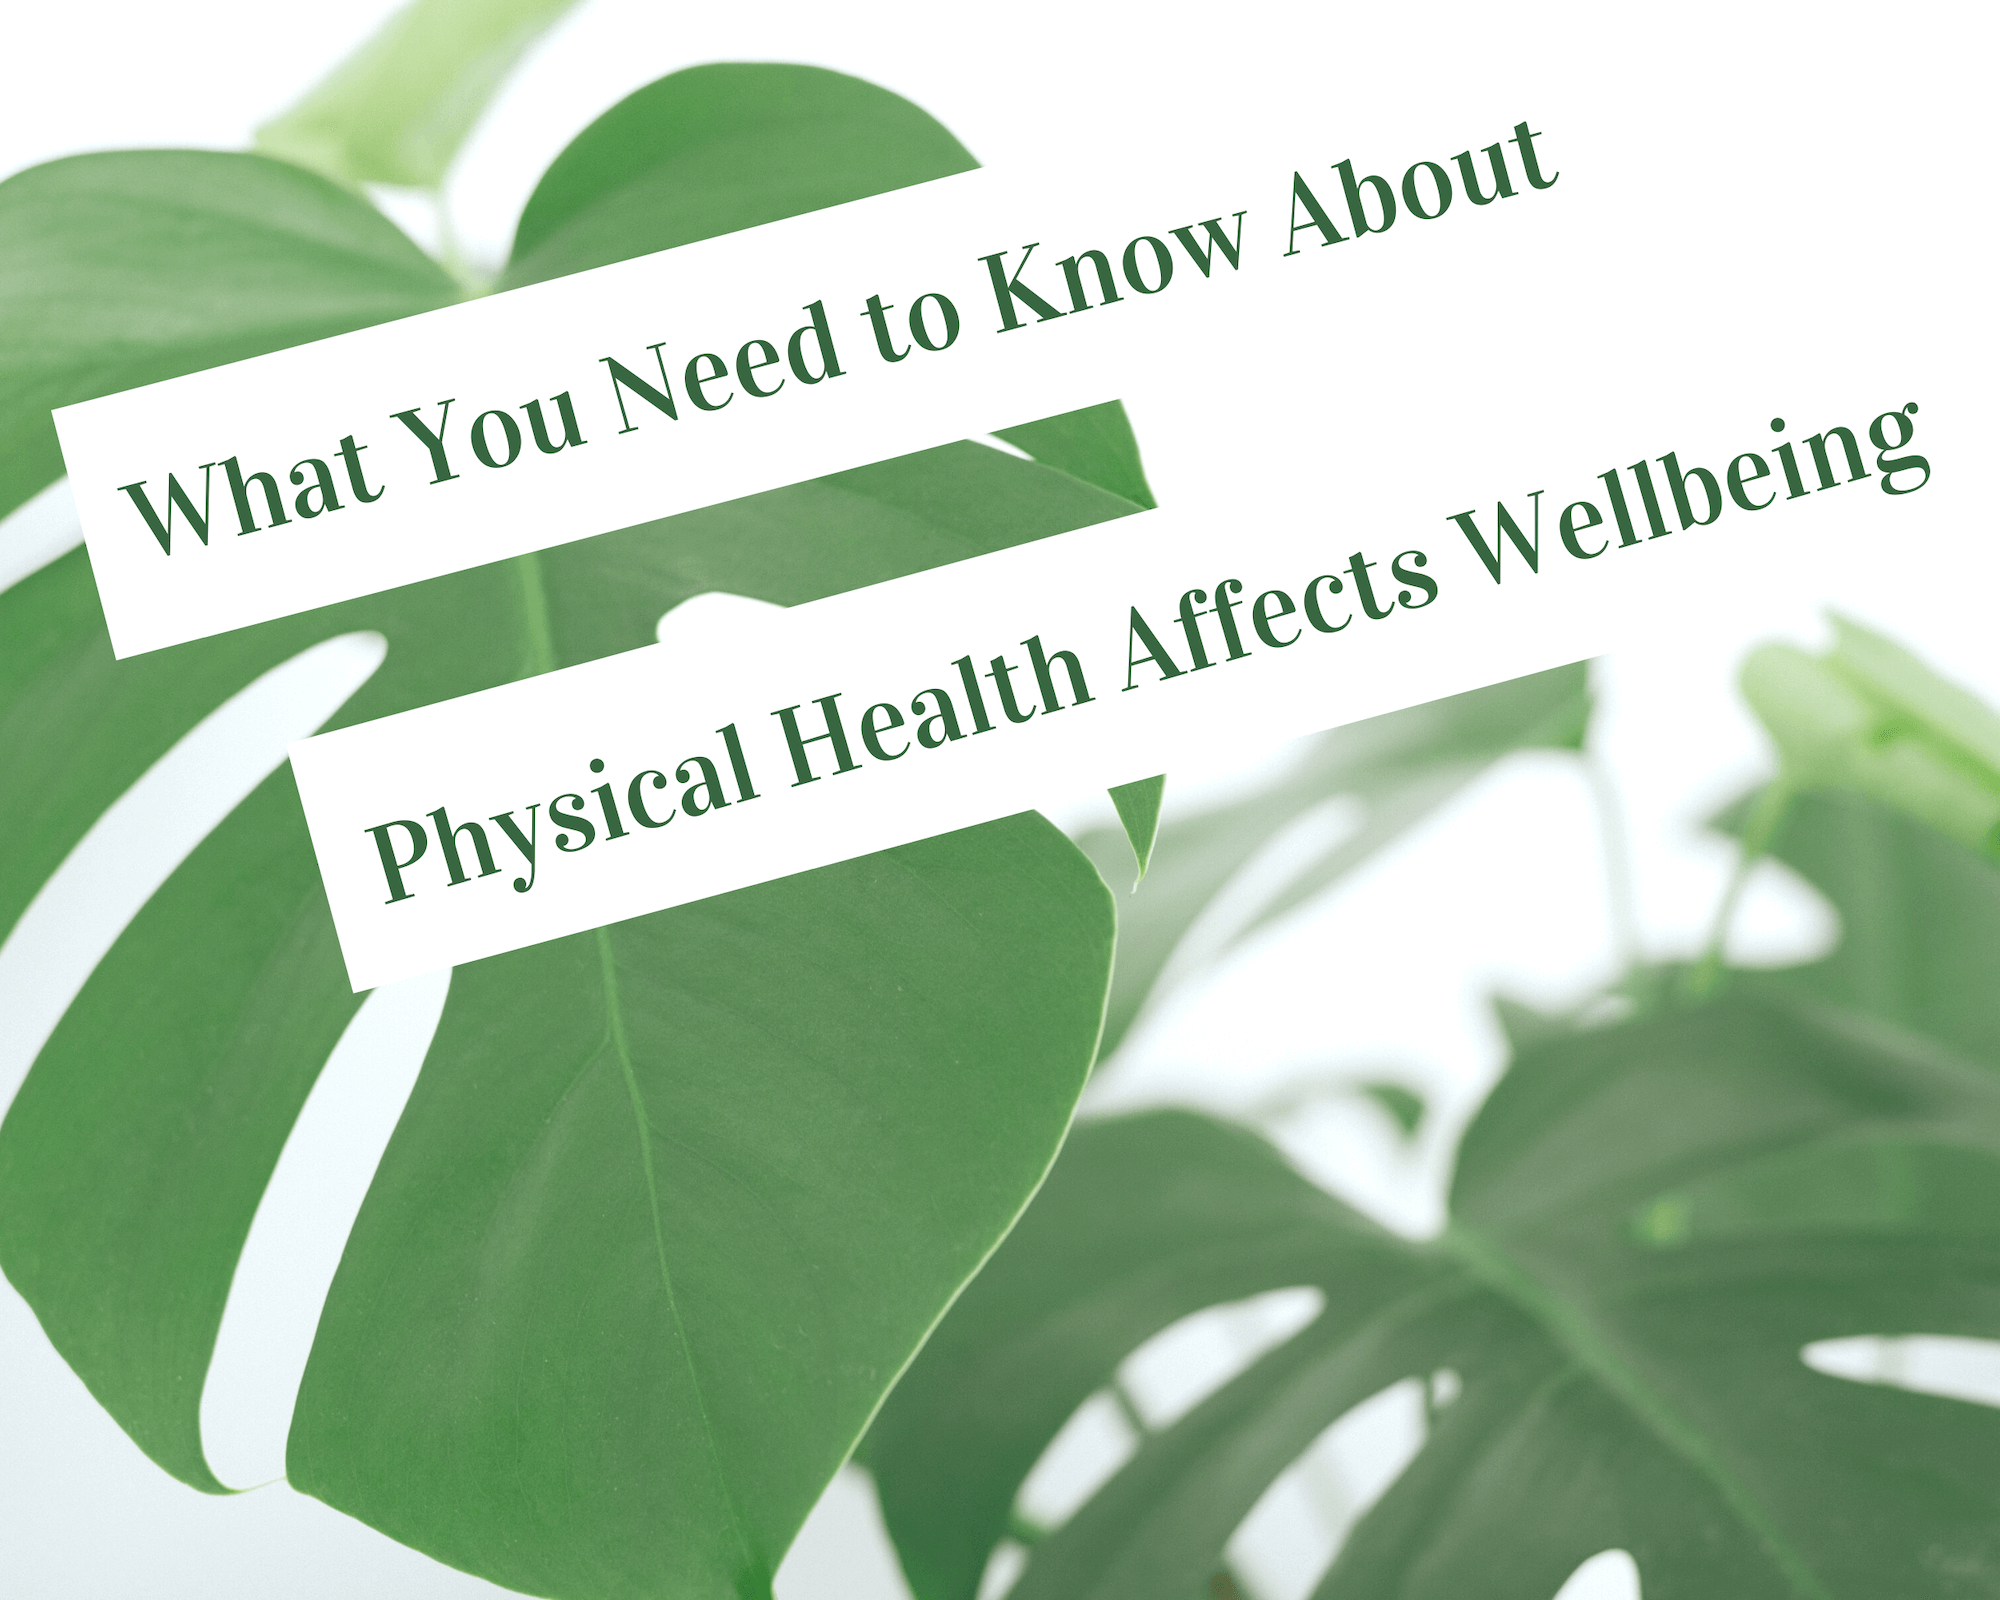 What you need to know about physical health affects wellbeing